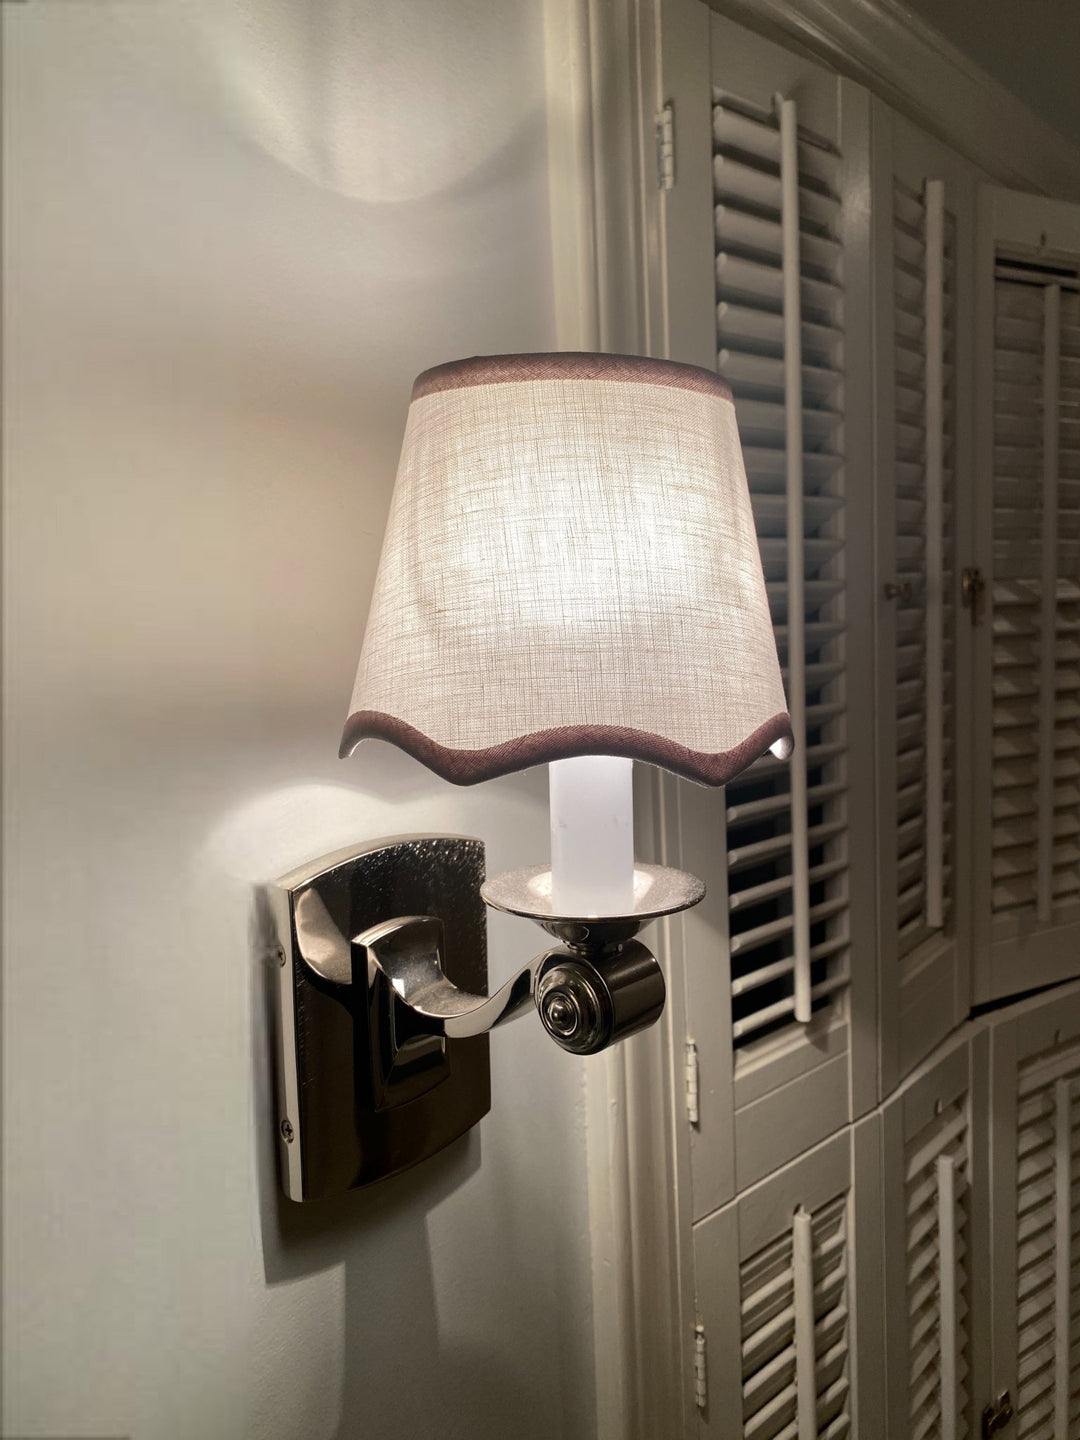 New - Scalloped Linen Snow Hardback Sconce Shade - Lux Lamp Shades